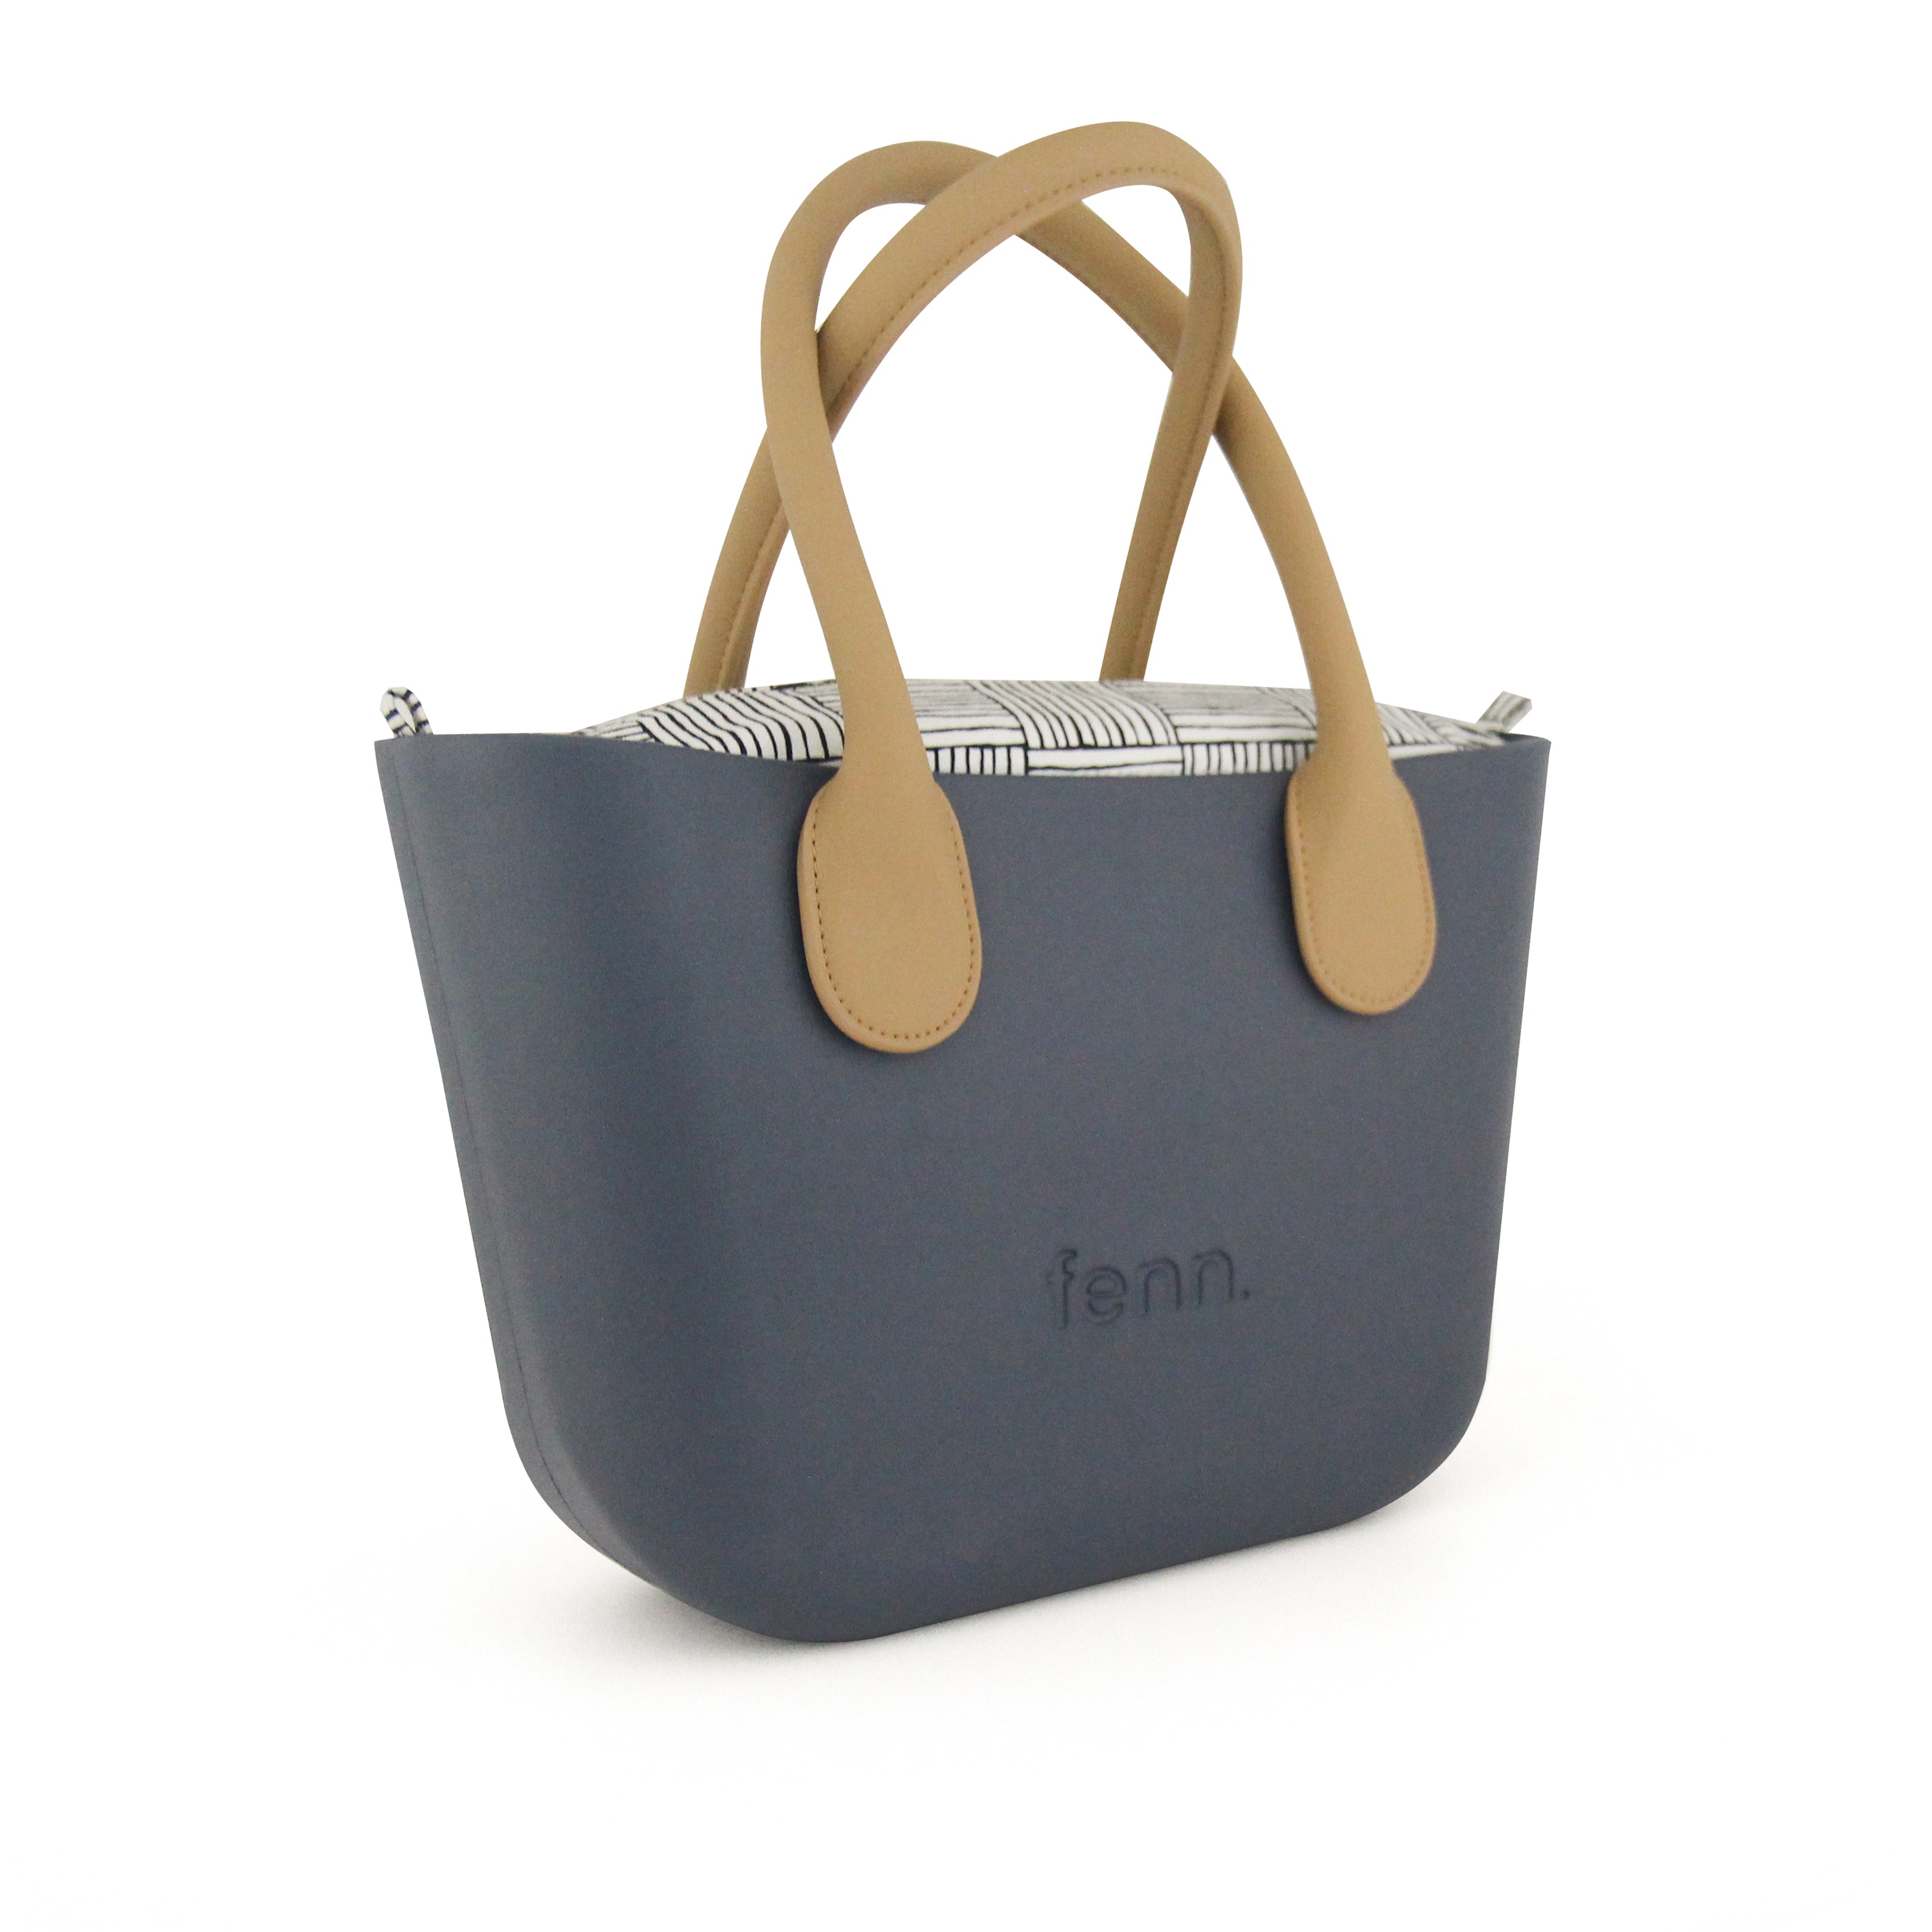 Petite DENIM BLUE with black & white canvas inner and tan handles